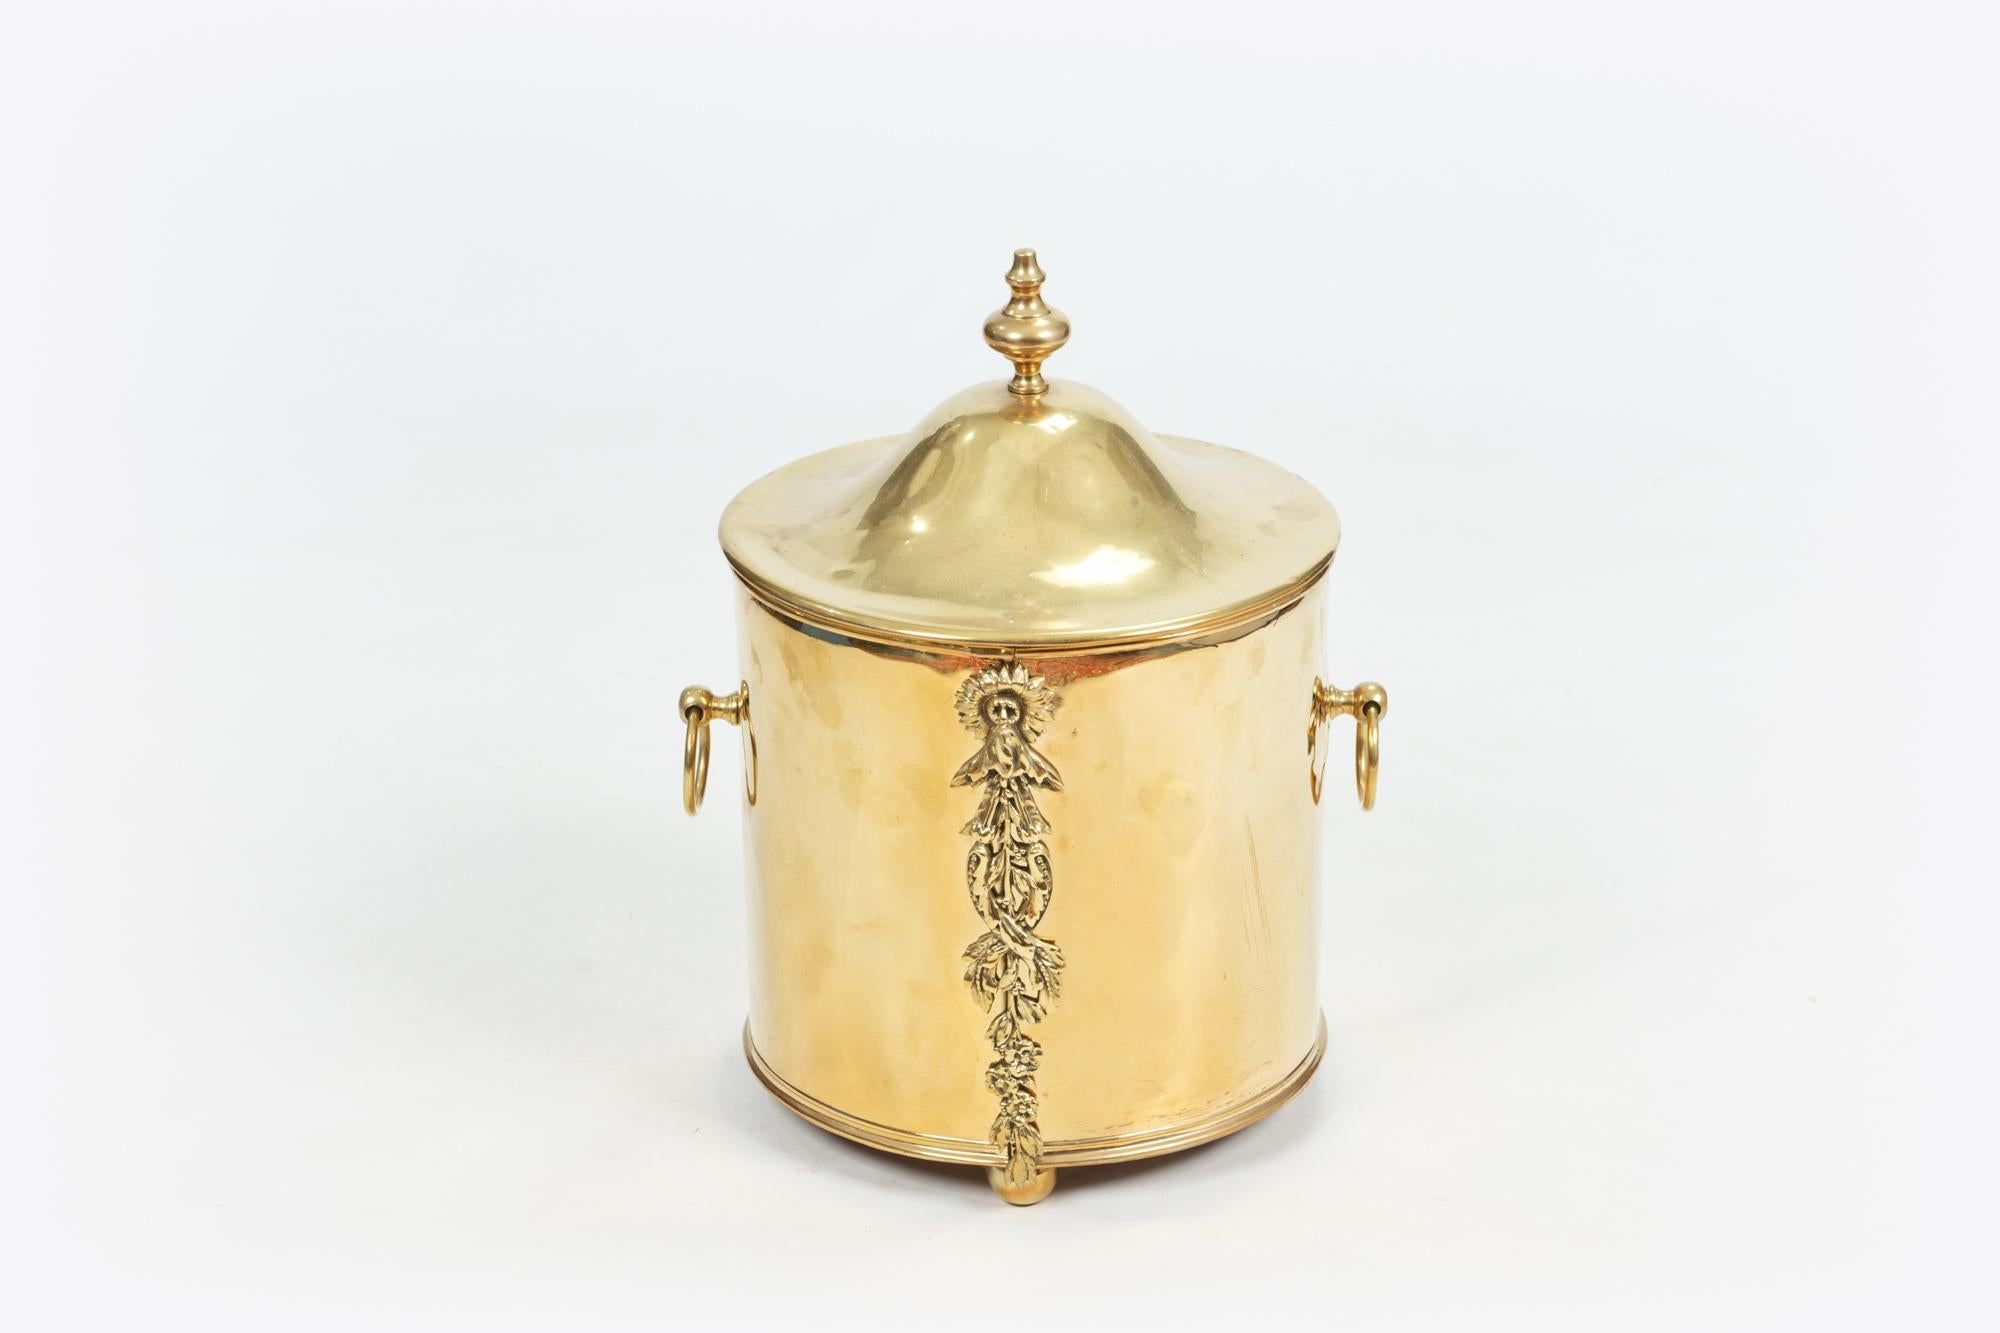 19th century brass coal scuttle with carrying handles and decorative finial

Dimensions: H 19